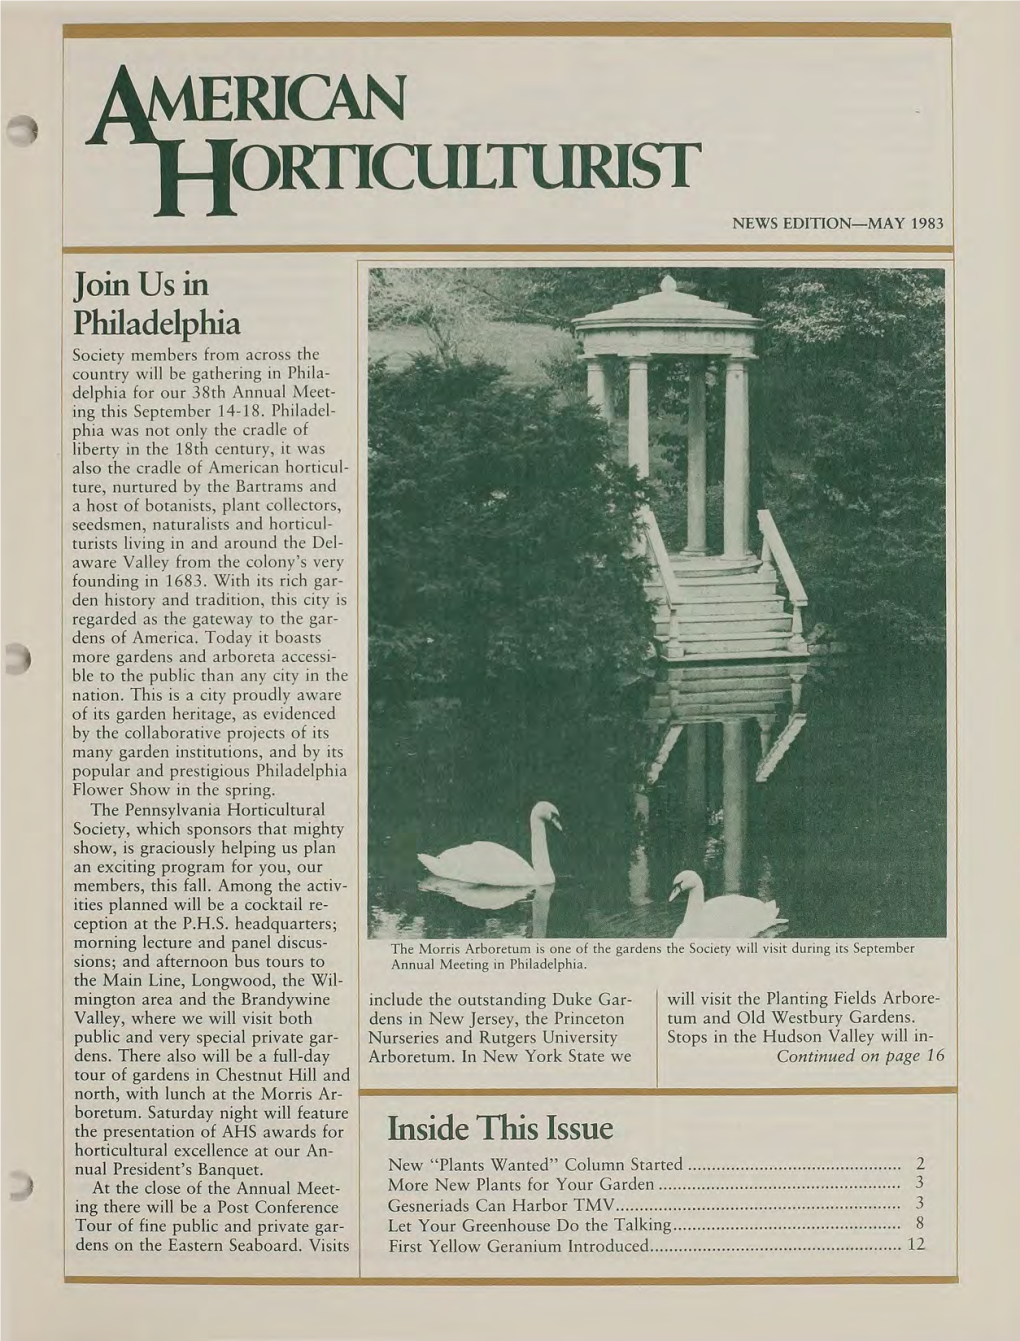 Orticulturist News Edition-May 1983